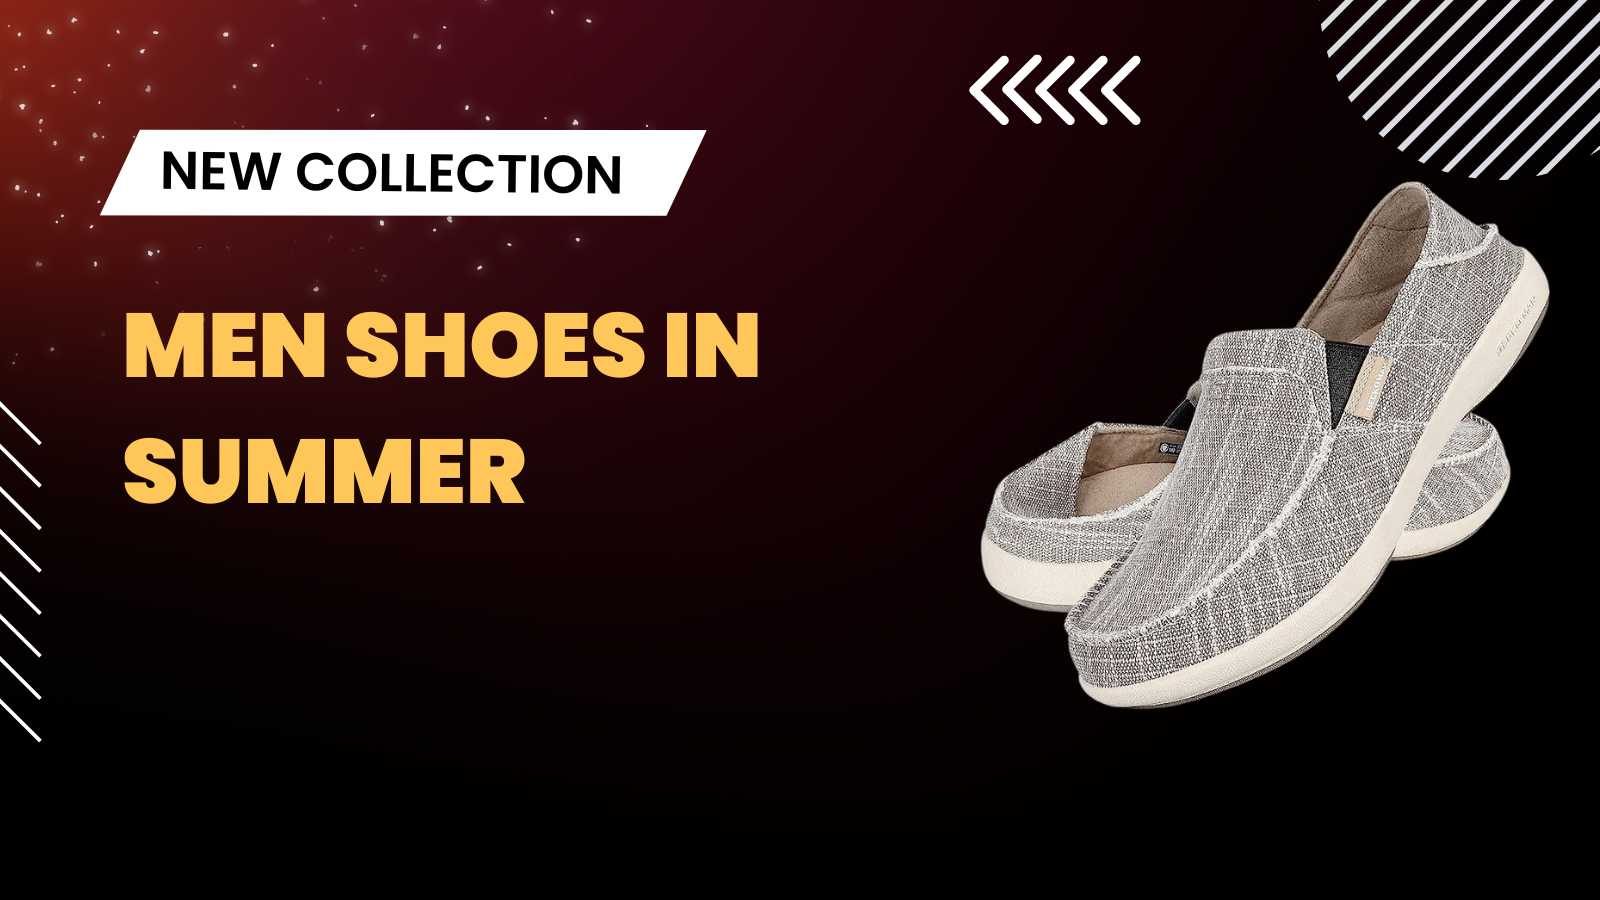 Men’s Shoes in Summer: Stay Stylish and Comfortable